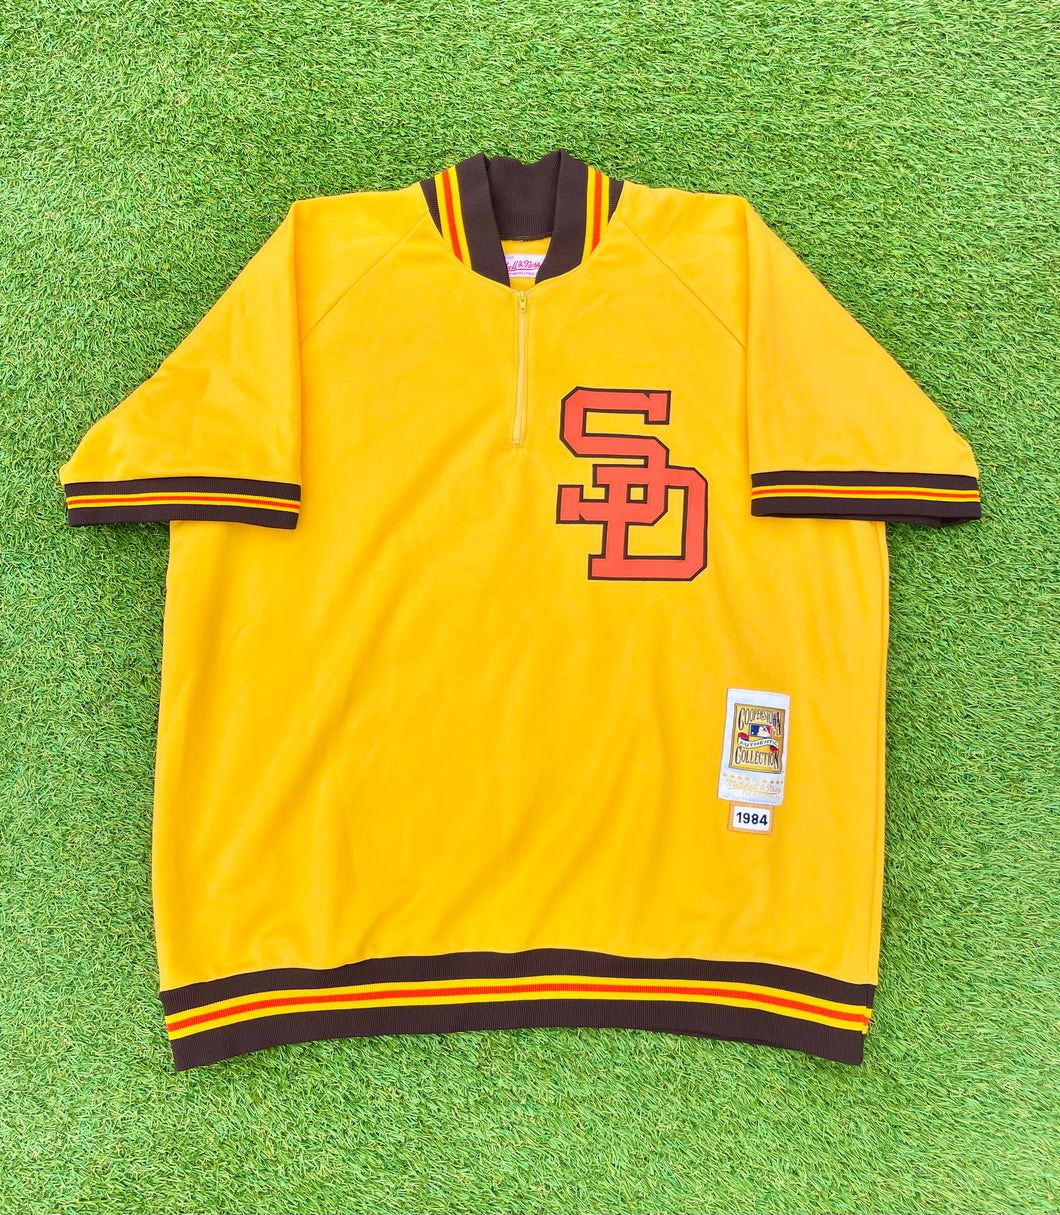 Tony Gwynn San Diego Padres Mitchell & Ness Cooperstown